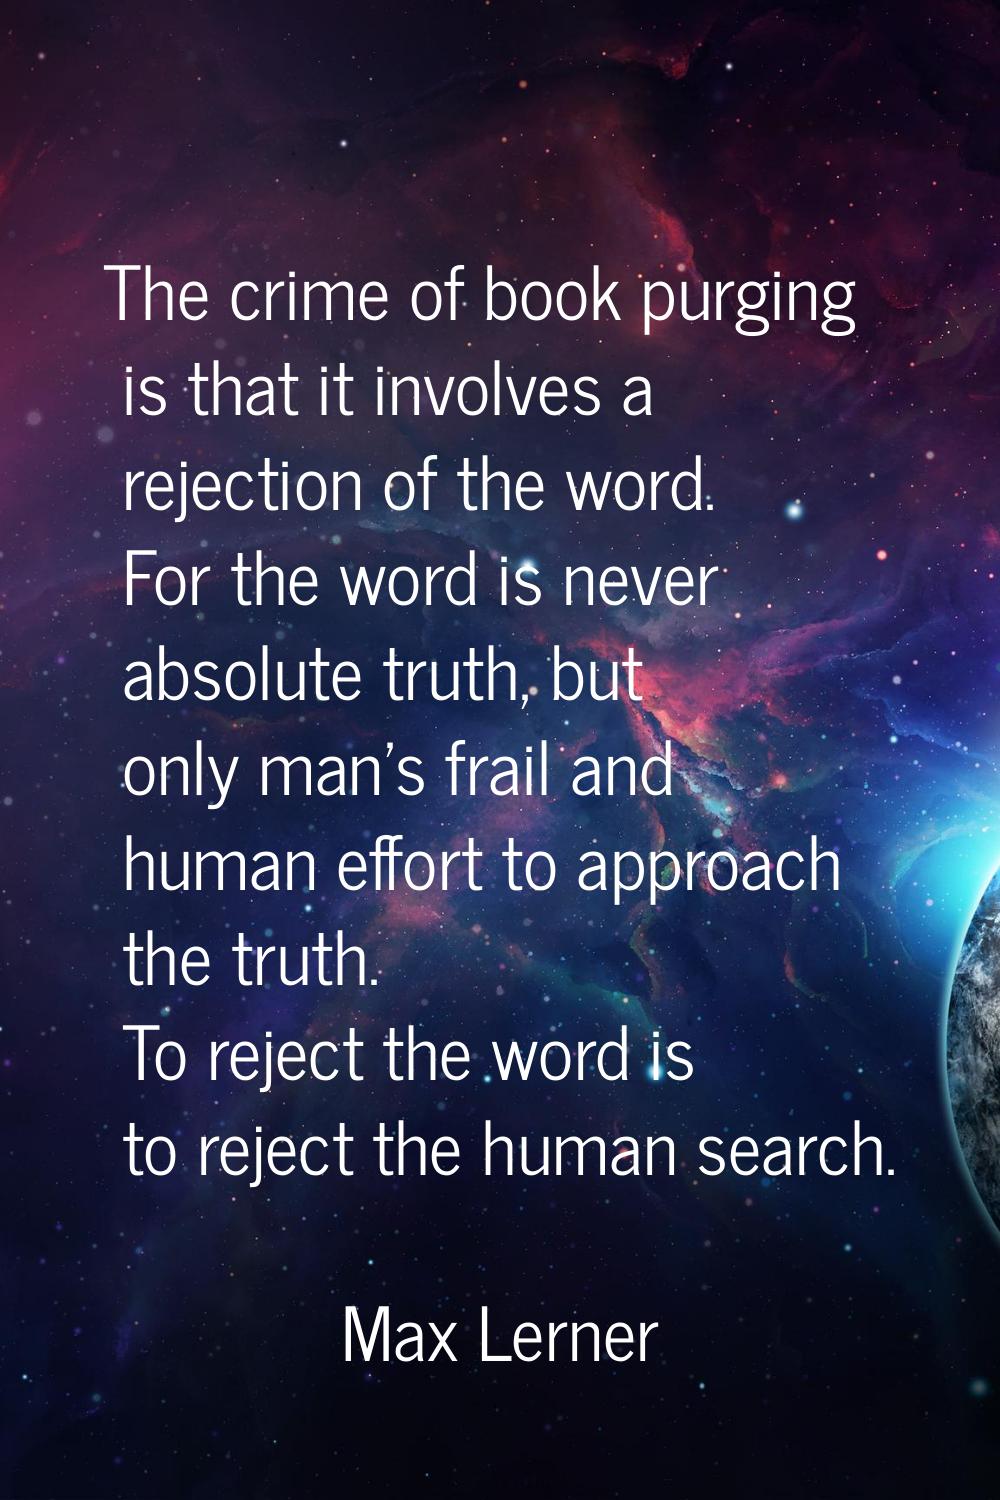 The crime of book purging is that it involves a rejection of the word. For the word is never absolu